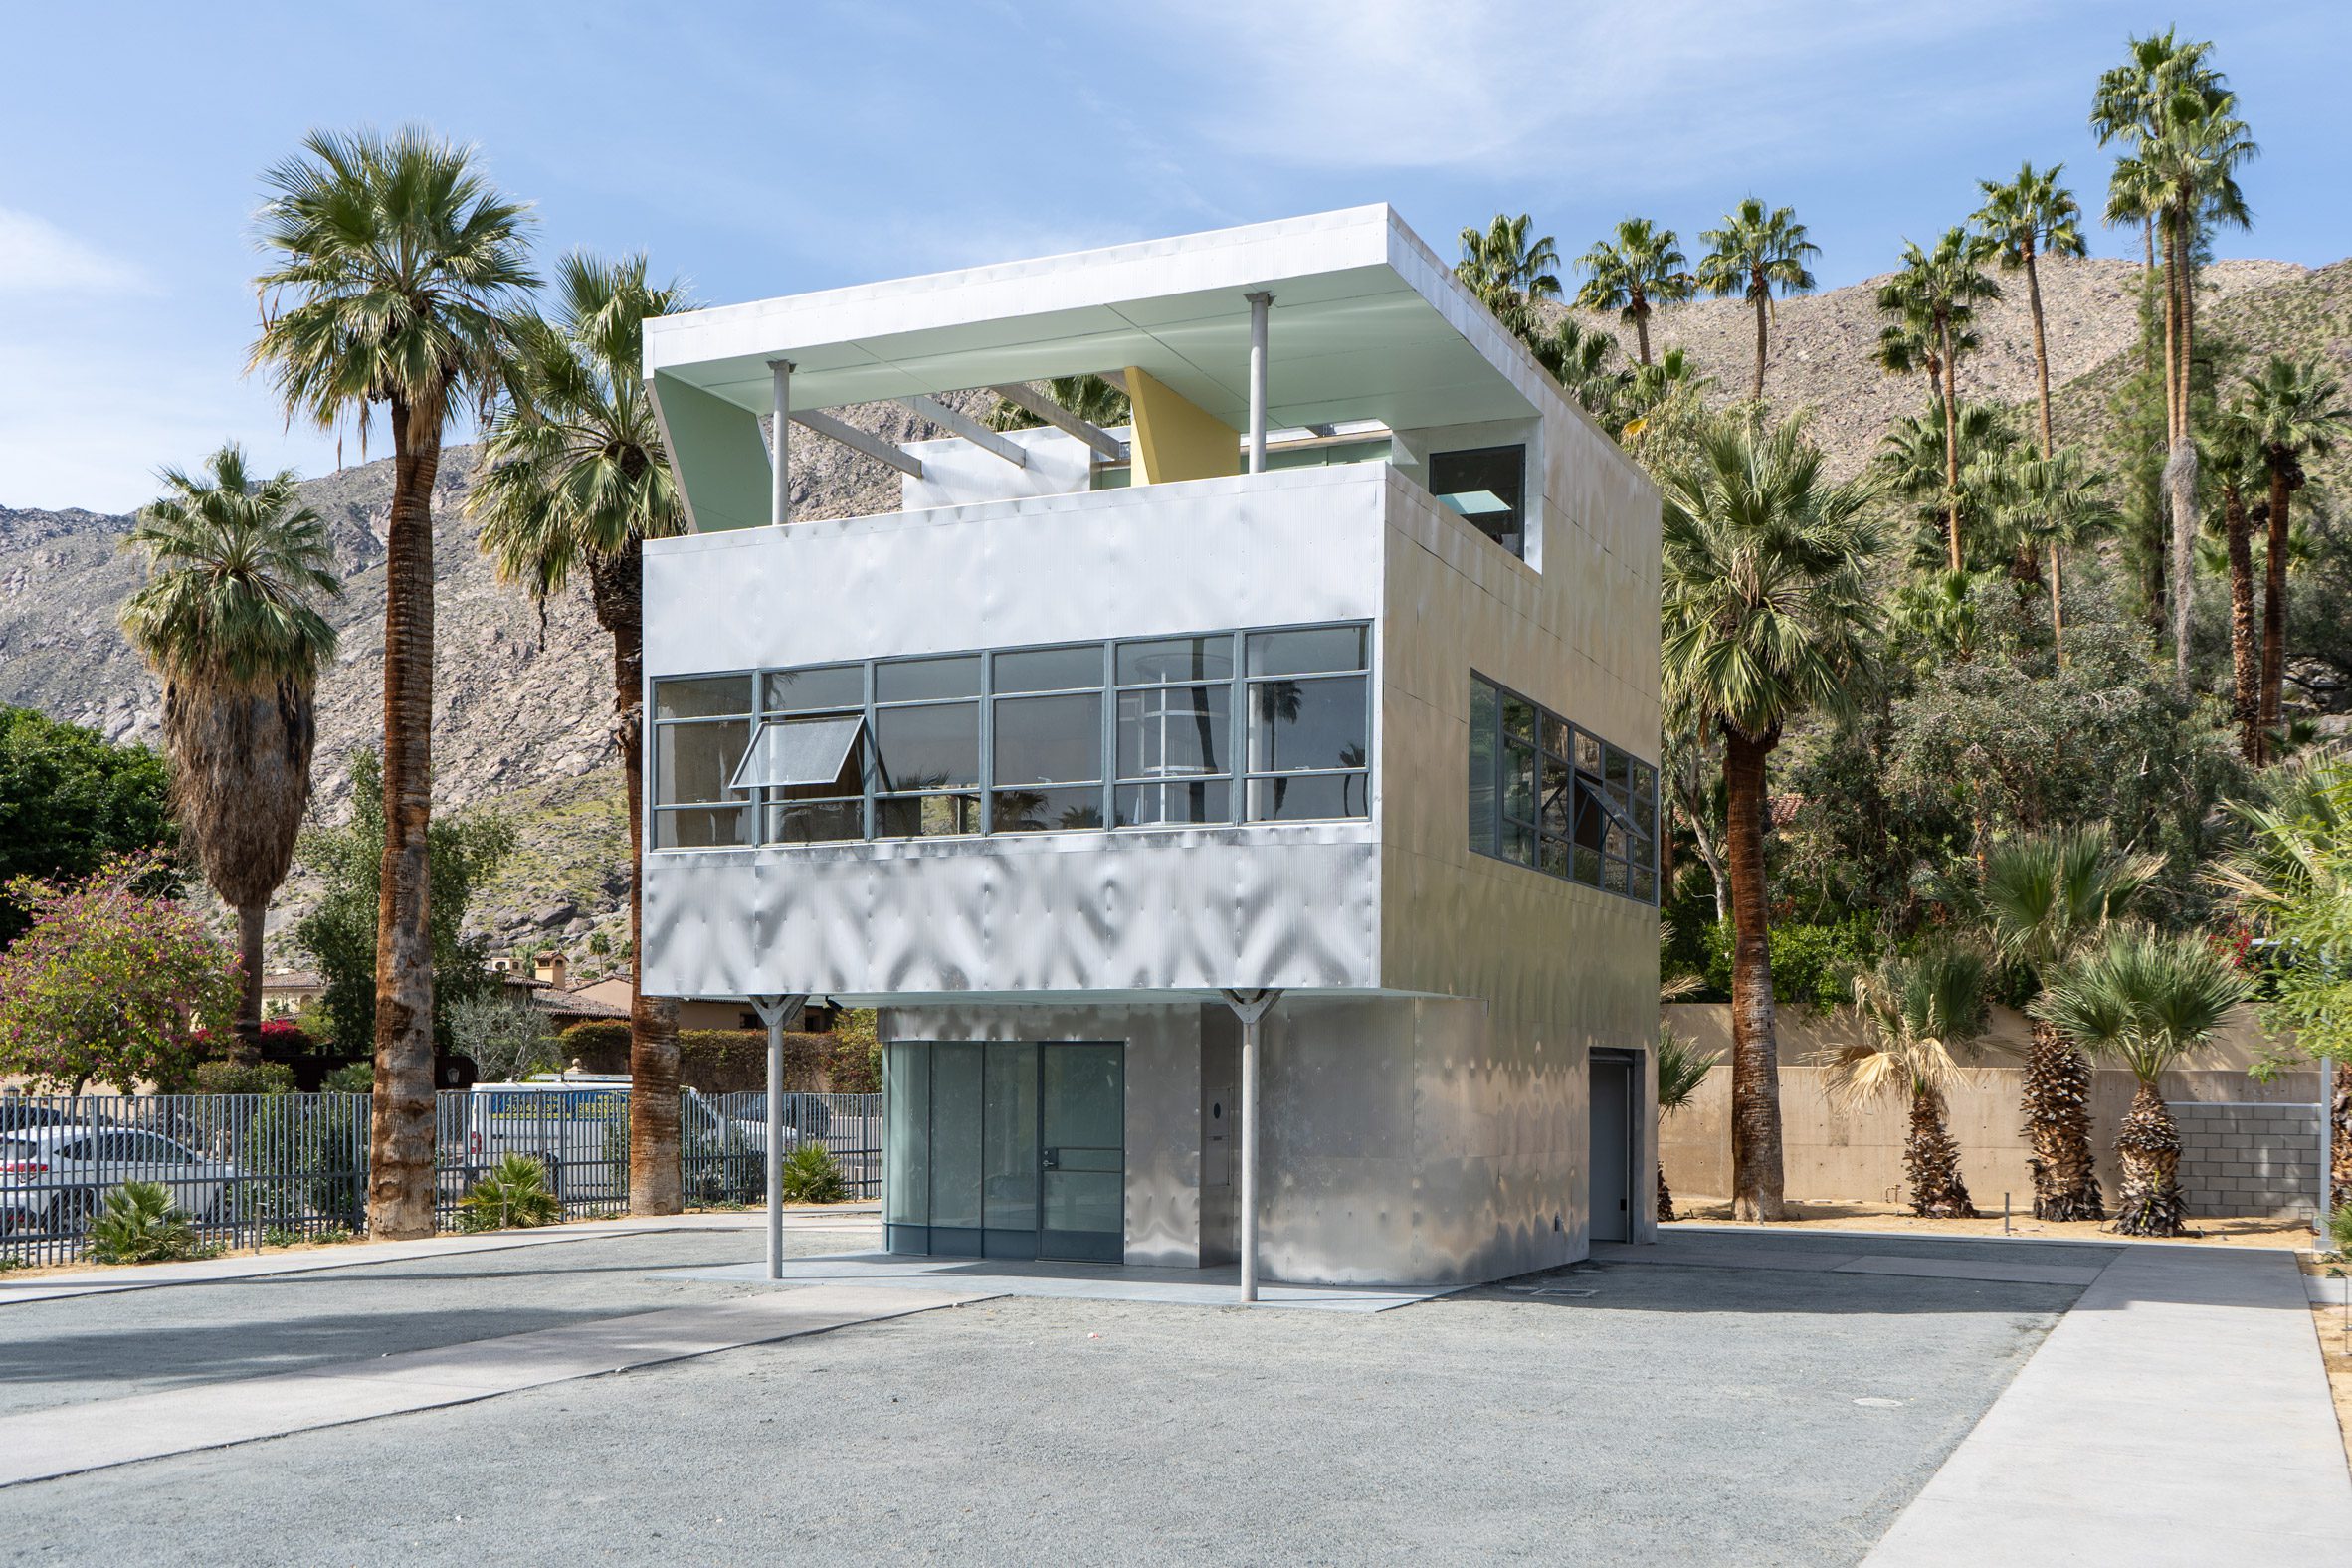 Albert Frey's 1930s Aluminaire House reassembled in Palm Springs